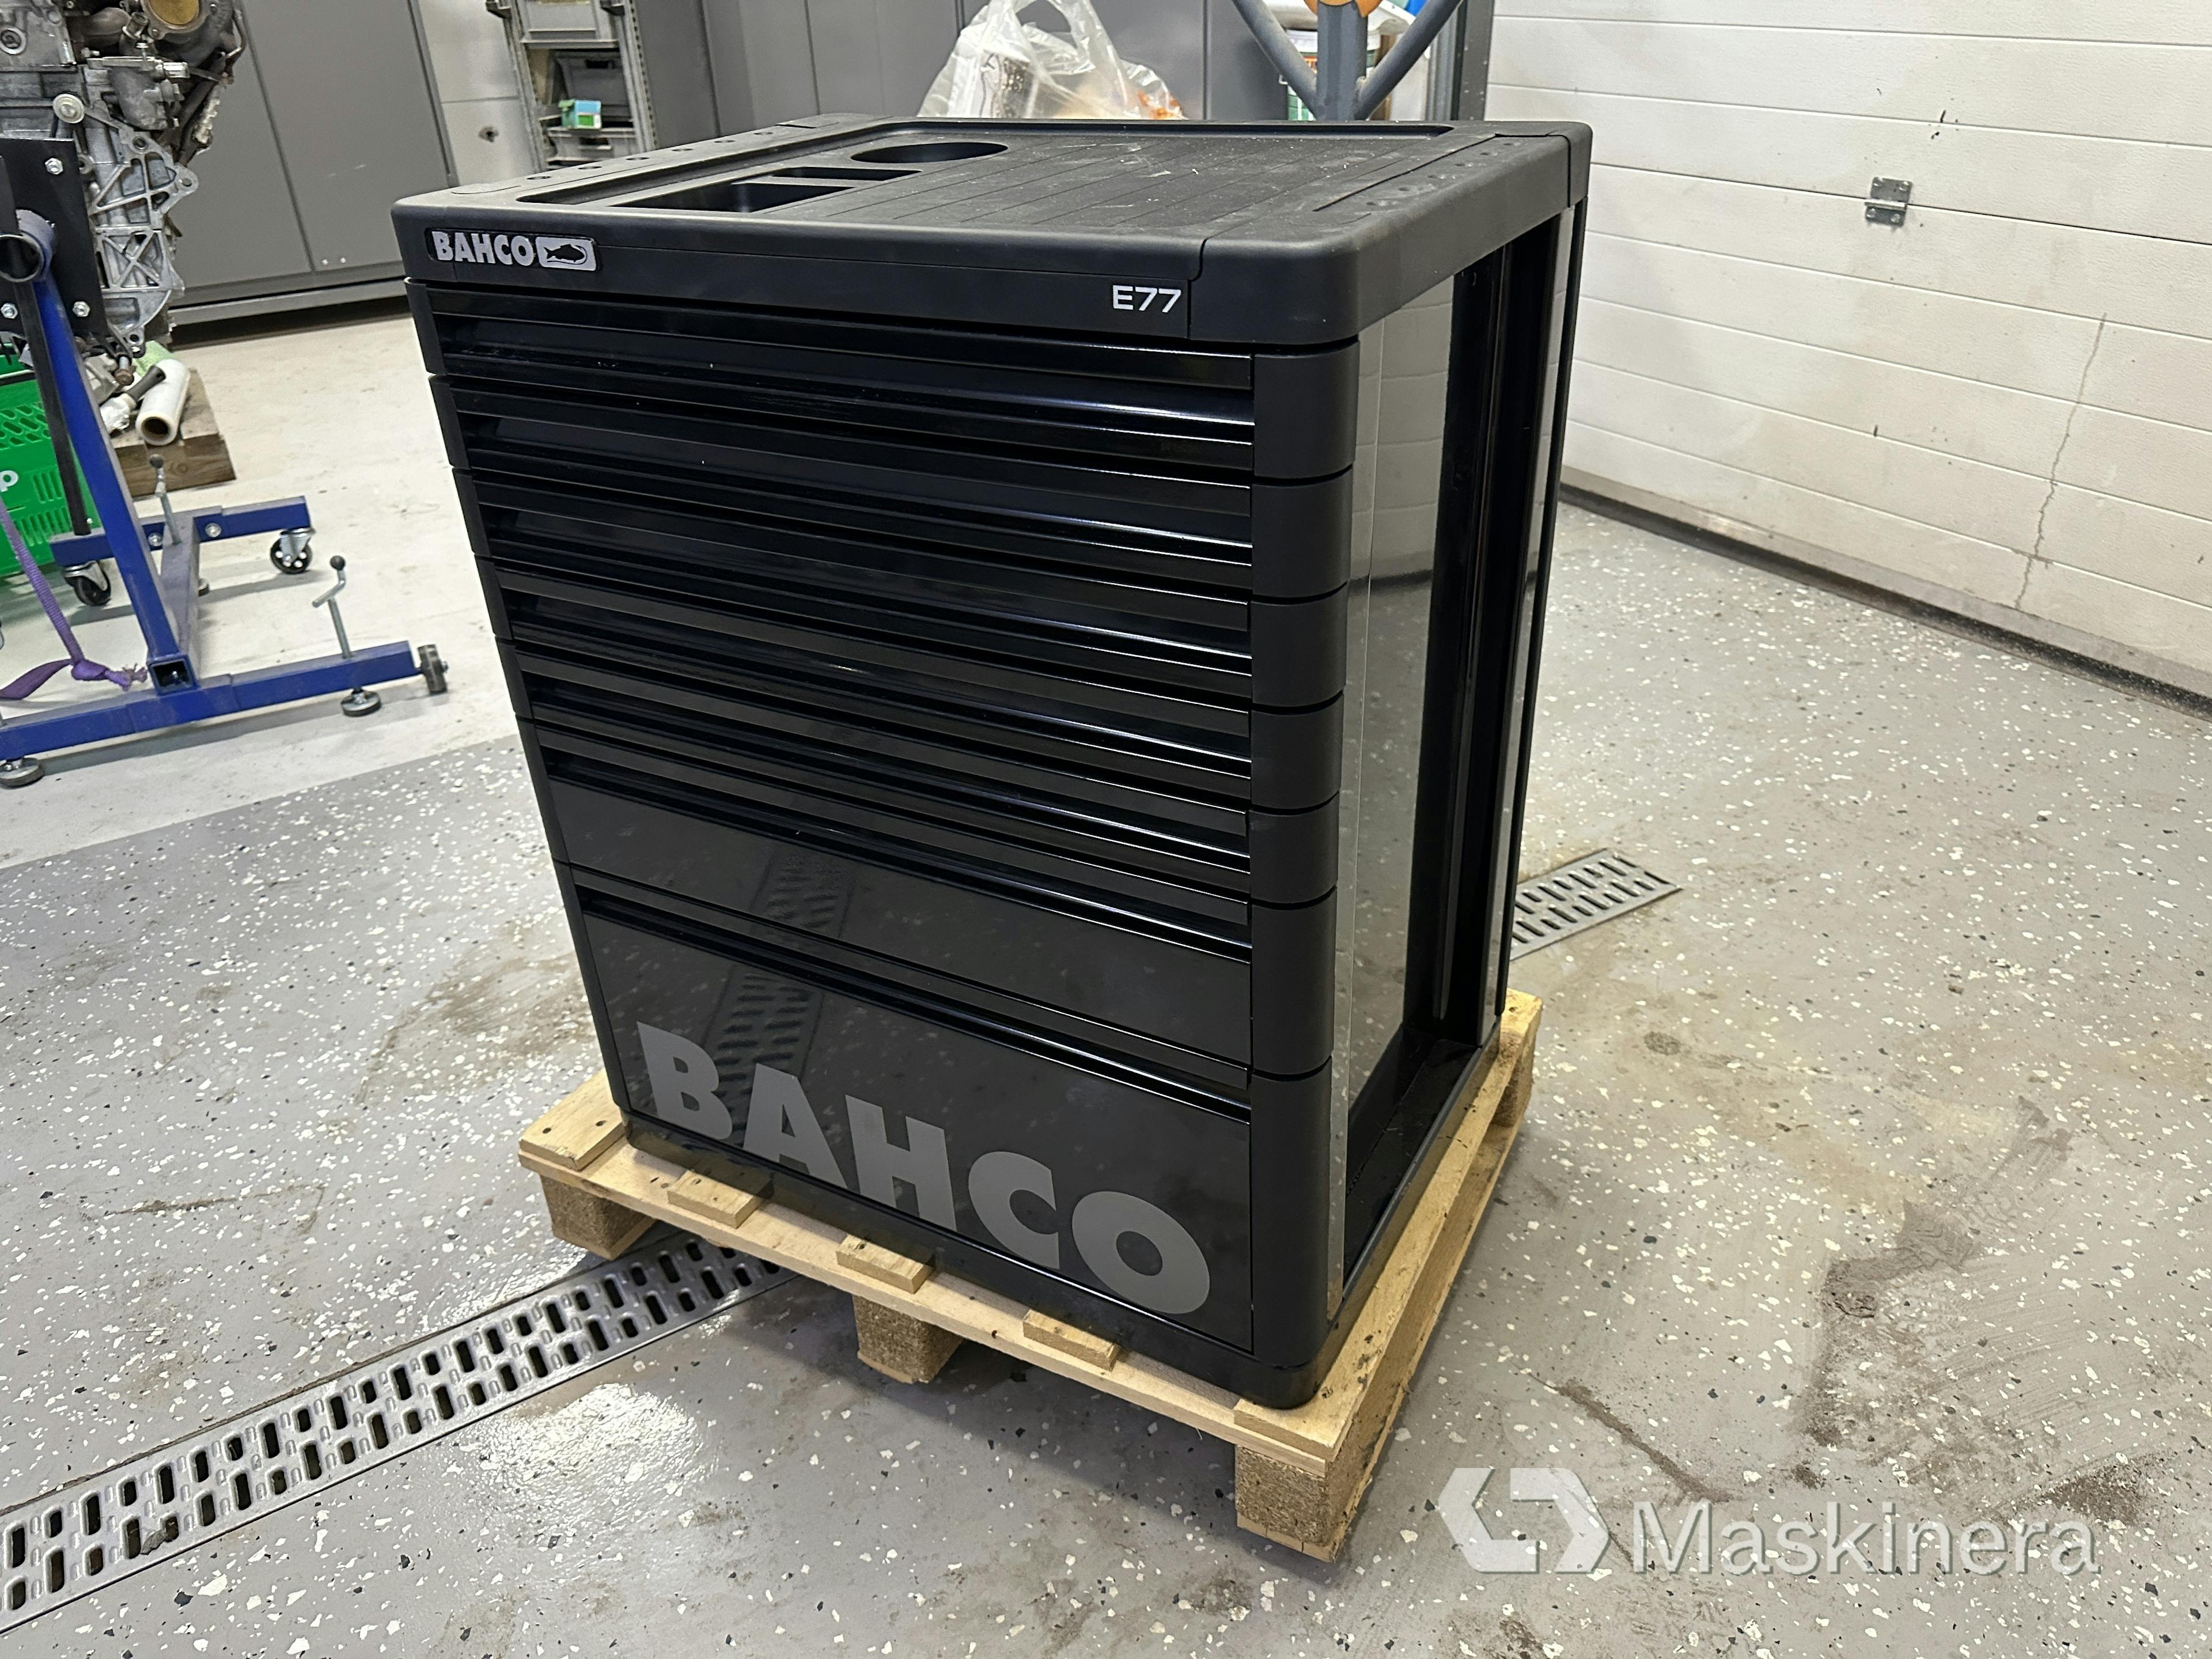 Tool trolley Bahco including tools